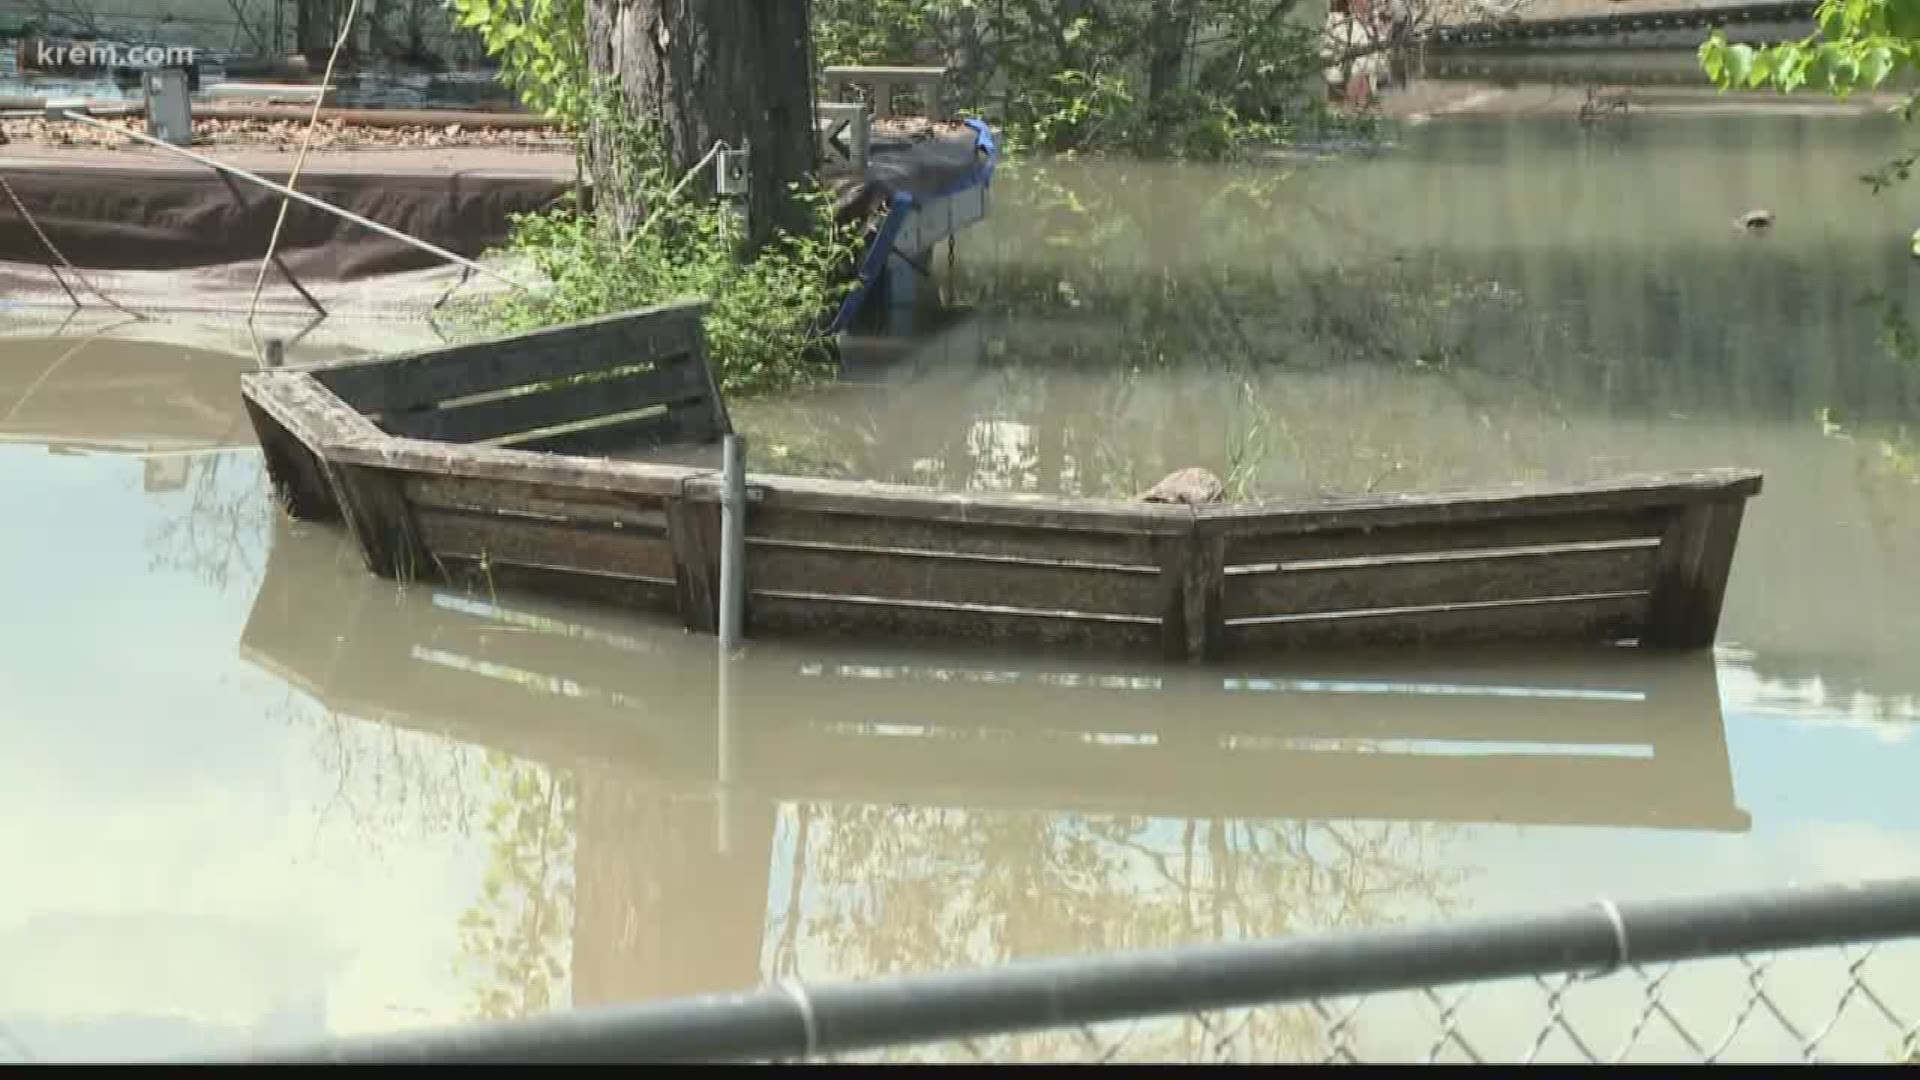 Experts say it is possible flood concerns could stretch into next month.